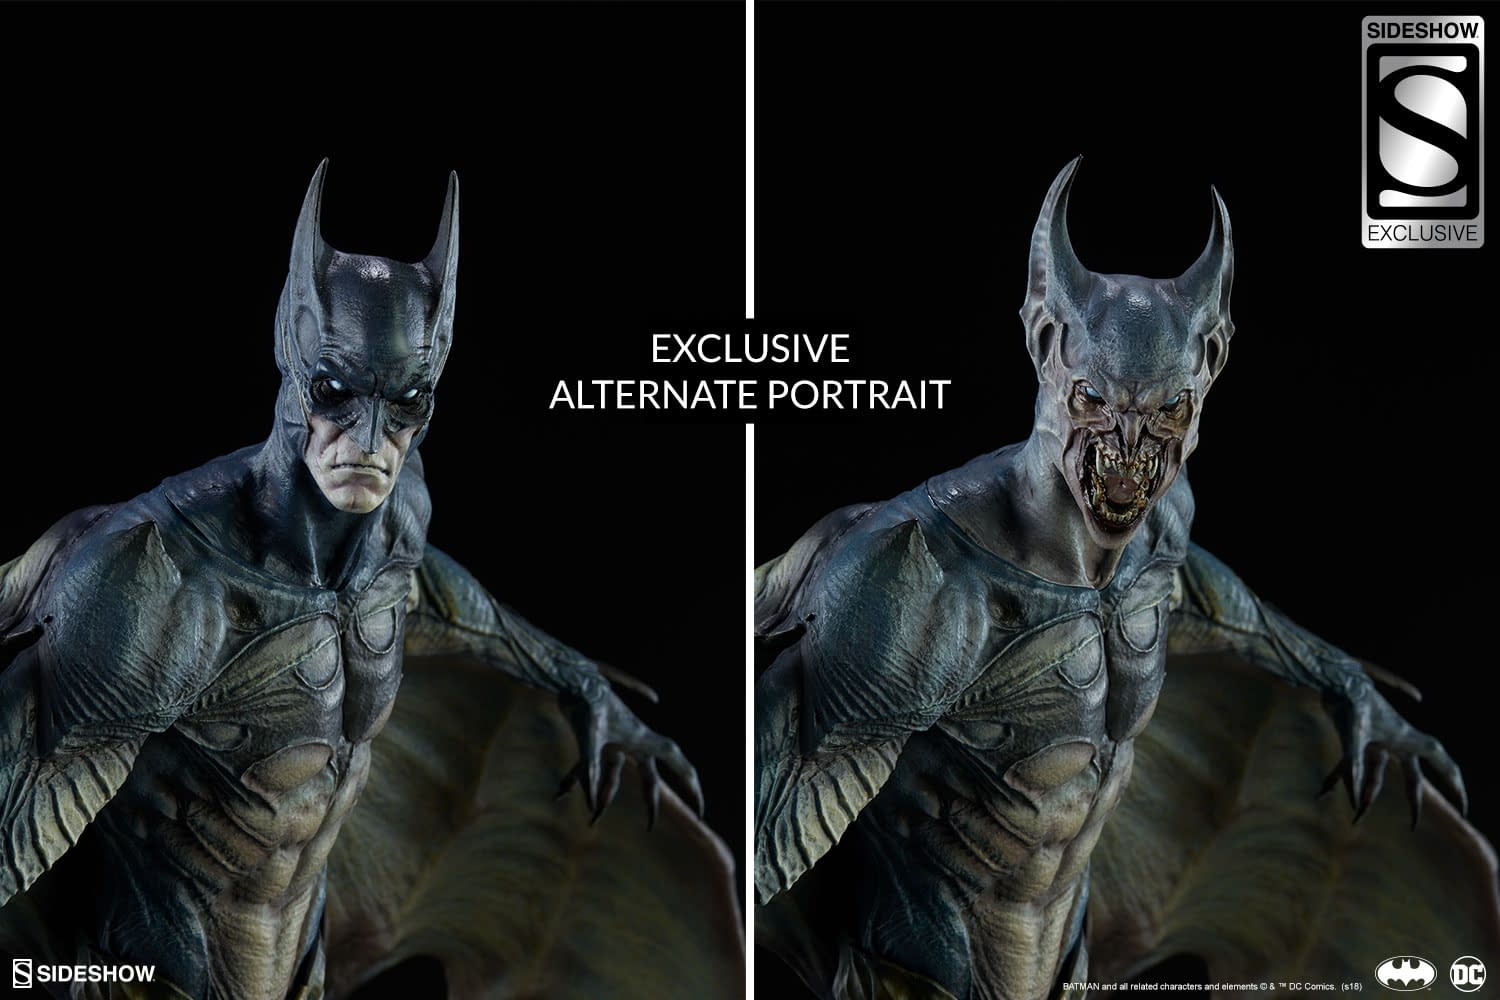 Batman Gotham Nightmare Statue from Sideshow Collectibles